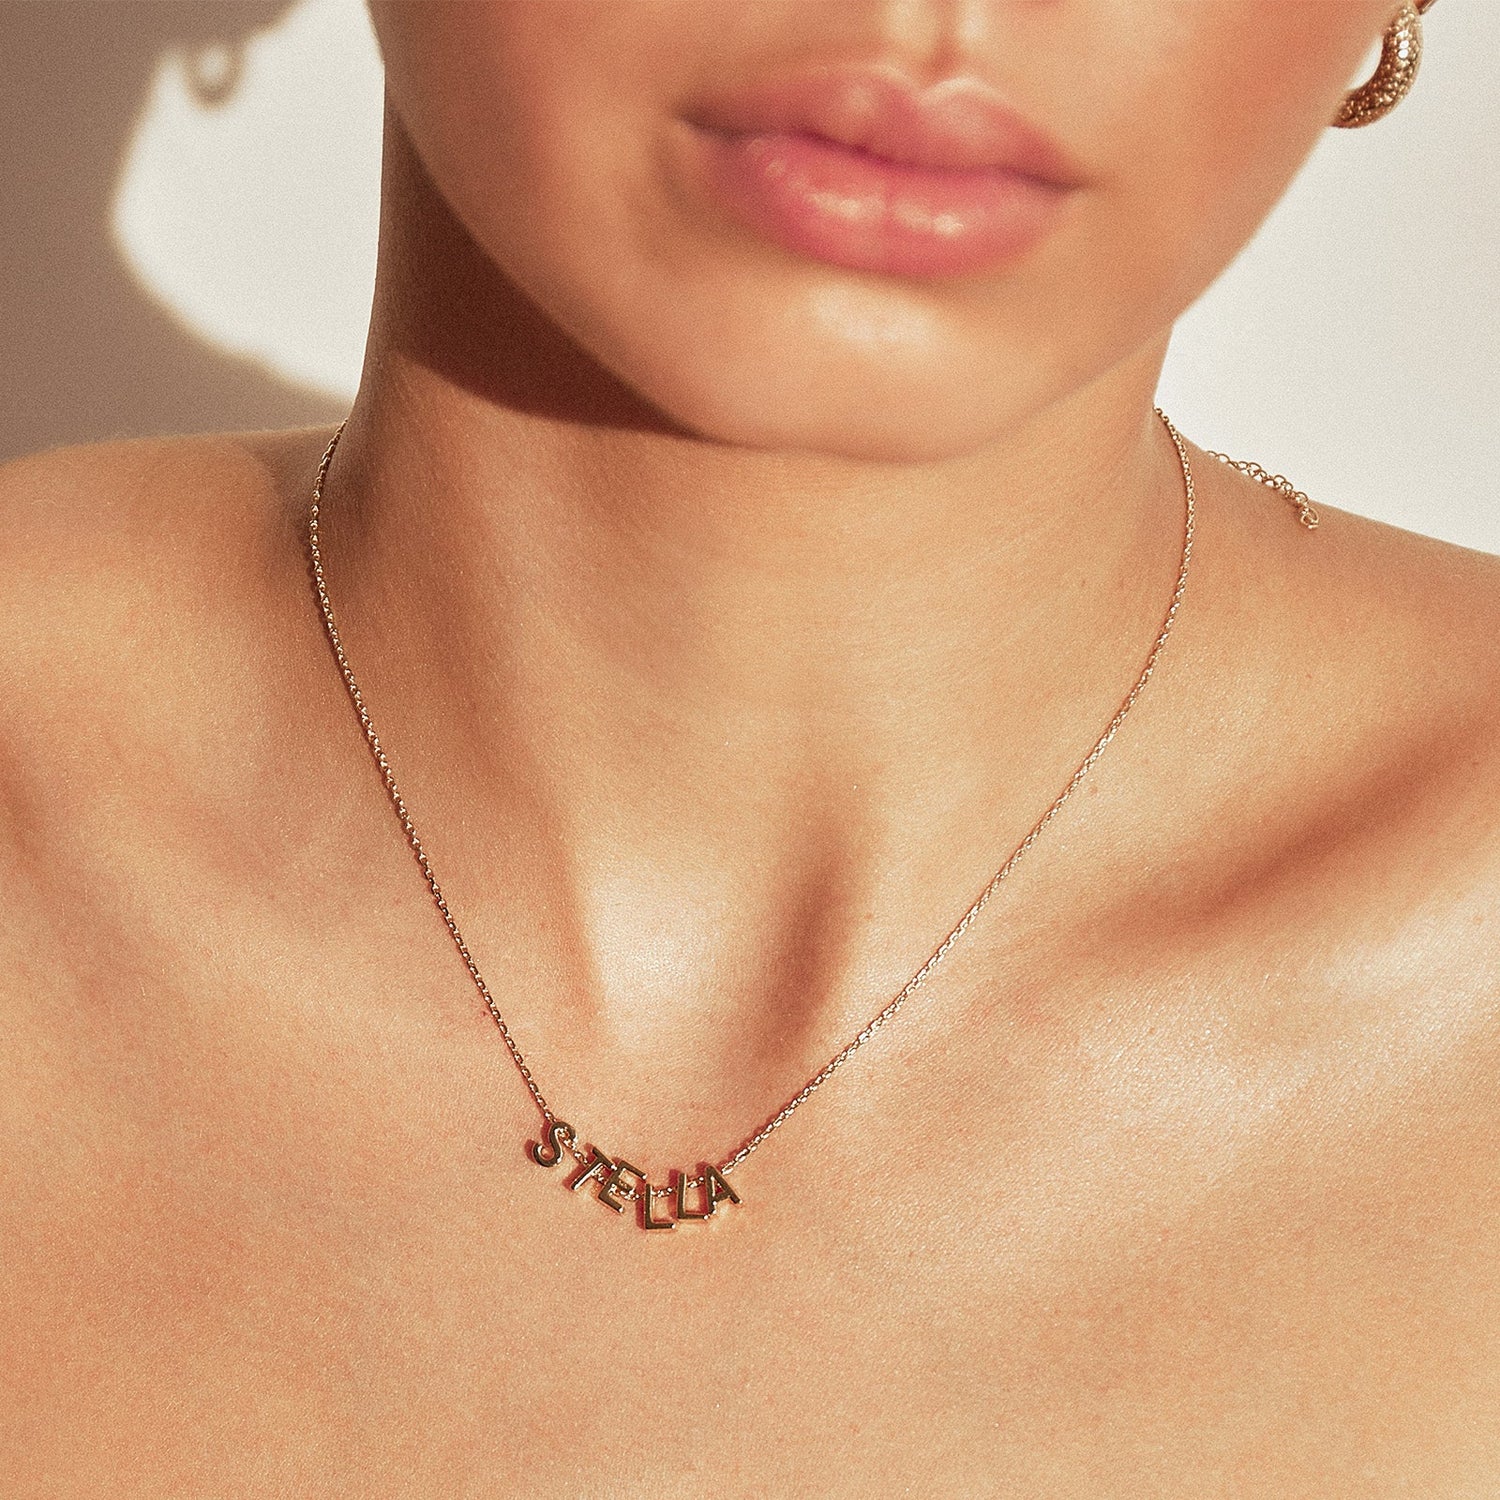 Say My Name Charm Necklace